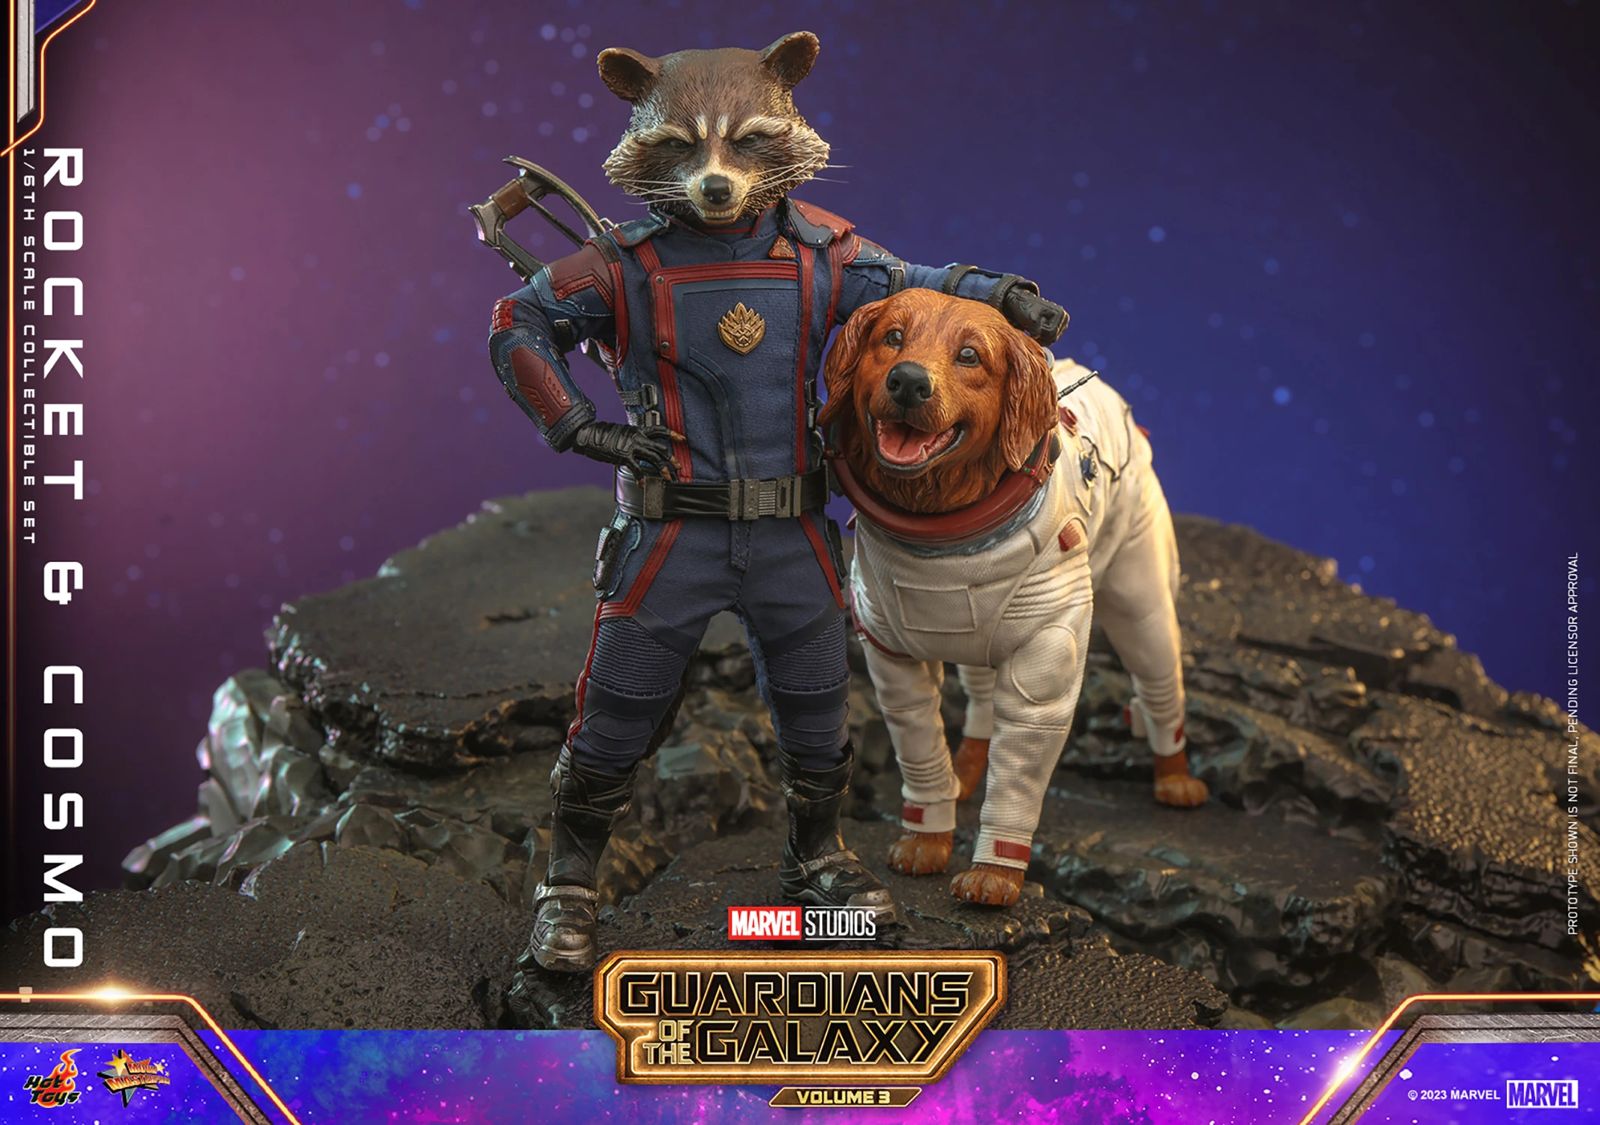 Hot Toys Marvel Rocket And Cosmo